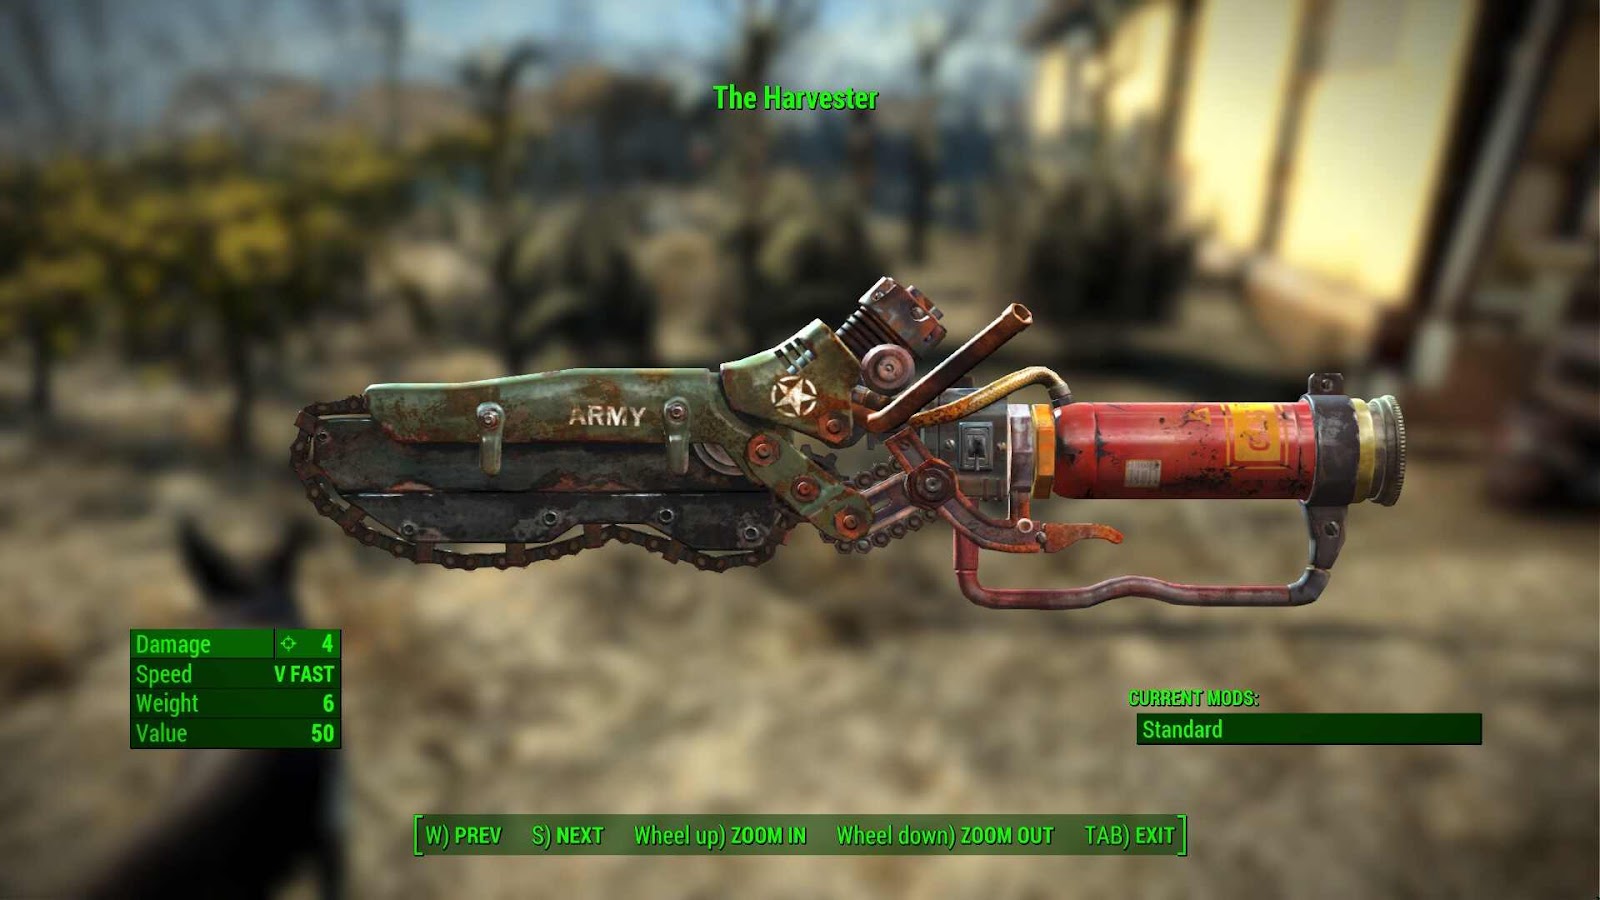 The Harvester, a miniaturized chainsaw with the word "ARMY" stenciled on the side, viewed through the inventory UI of Fallout 4.